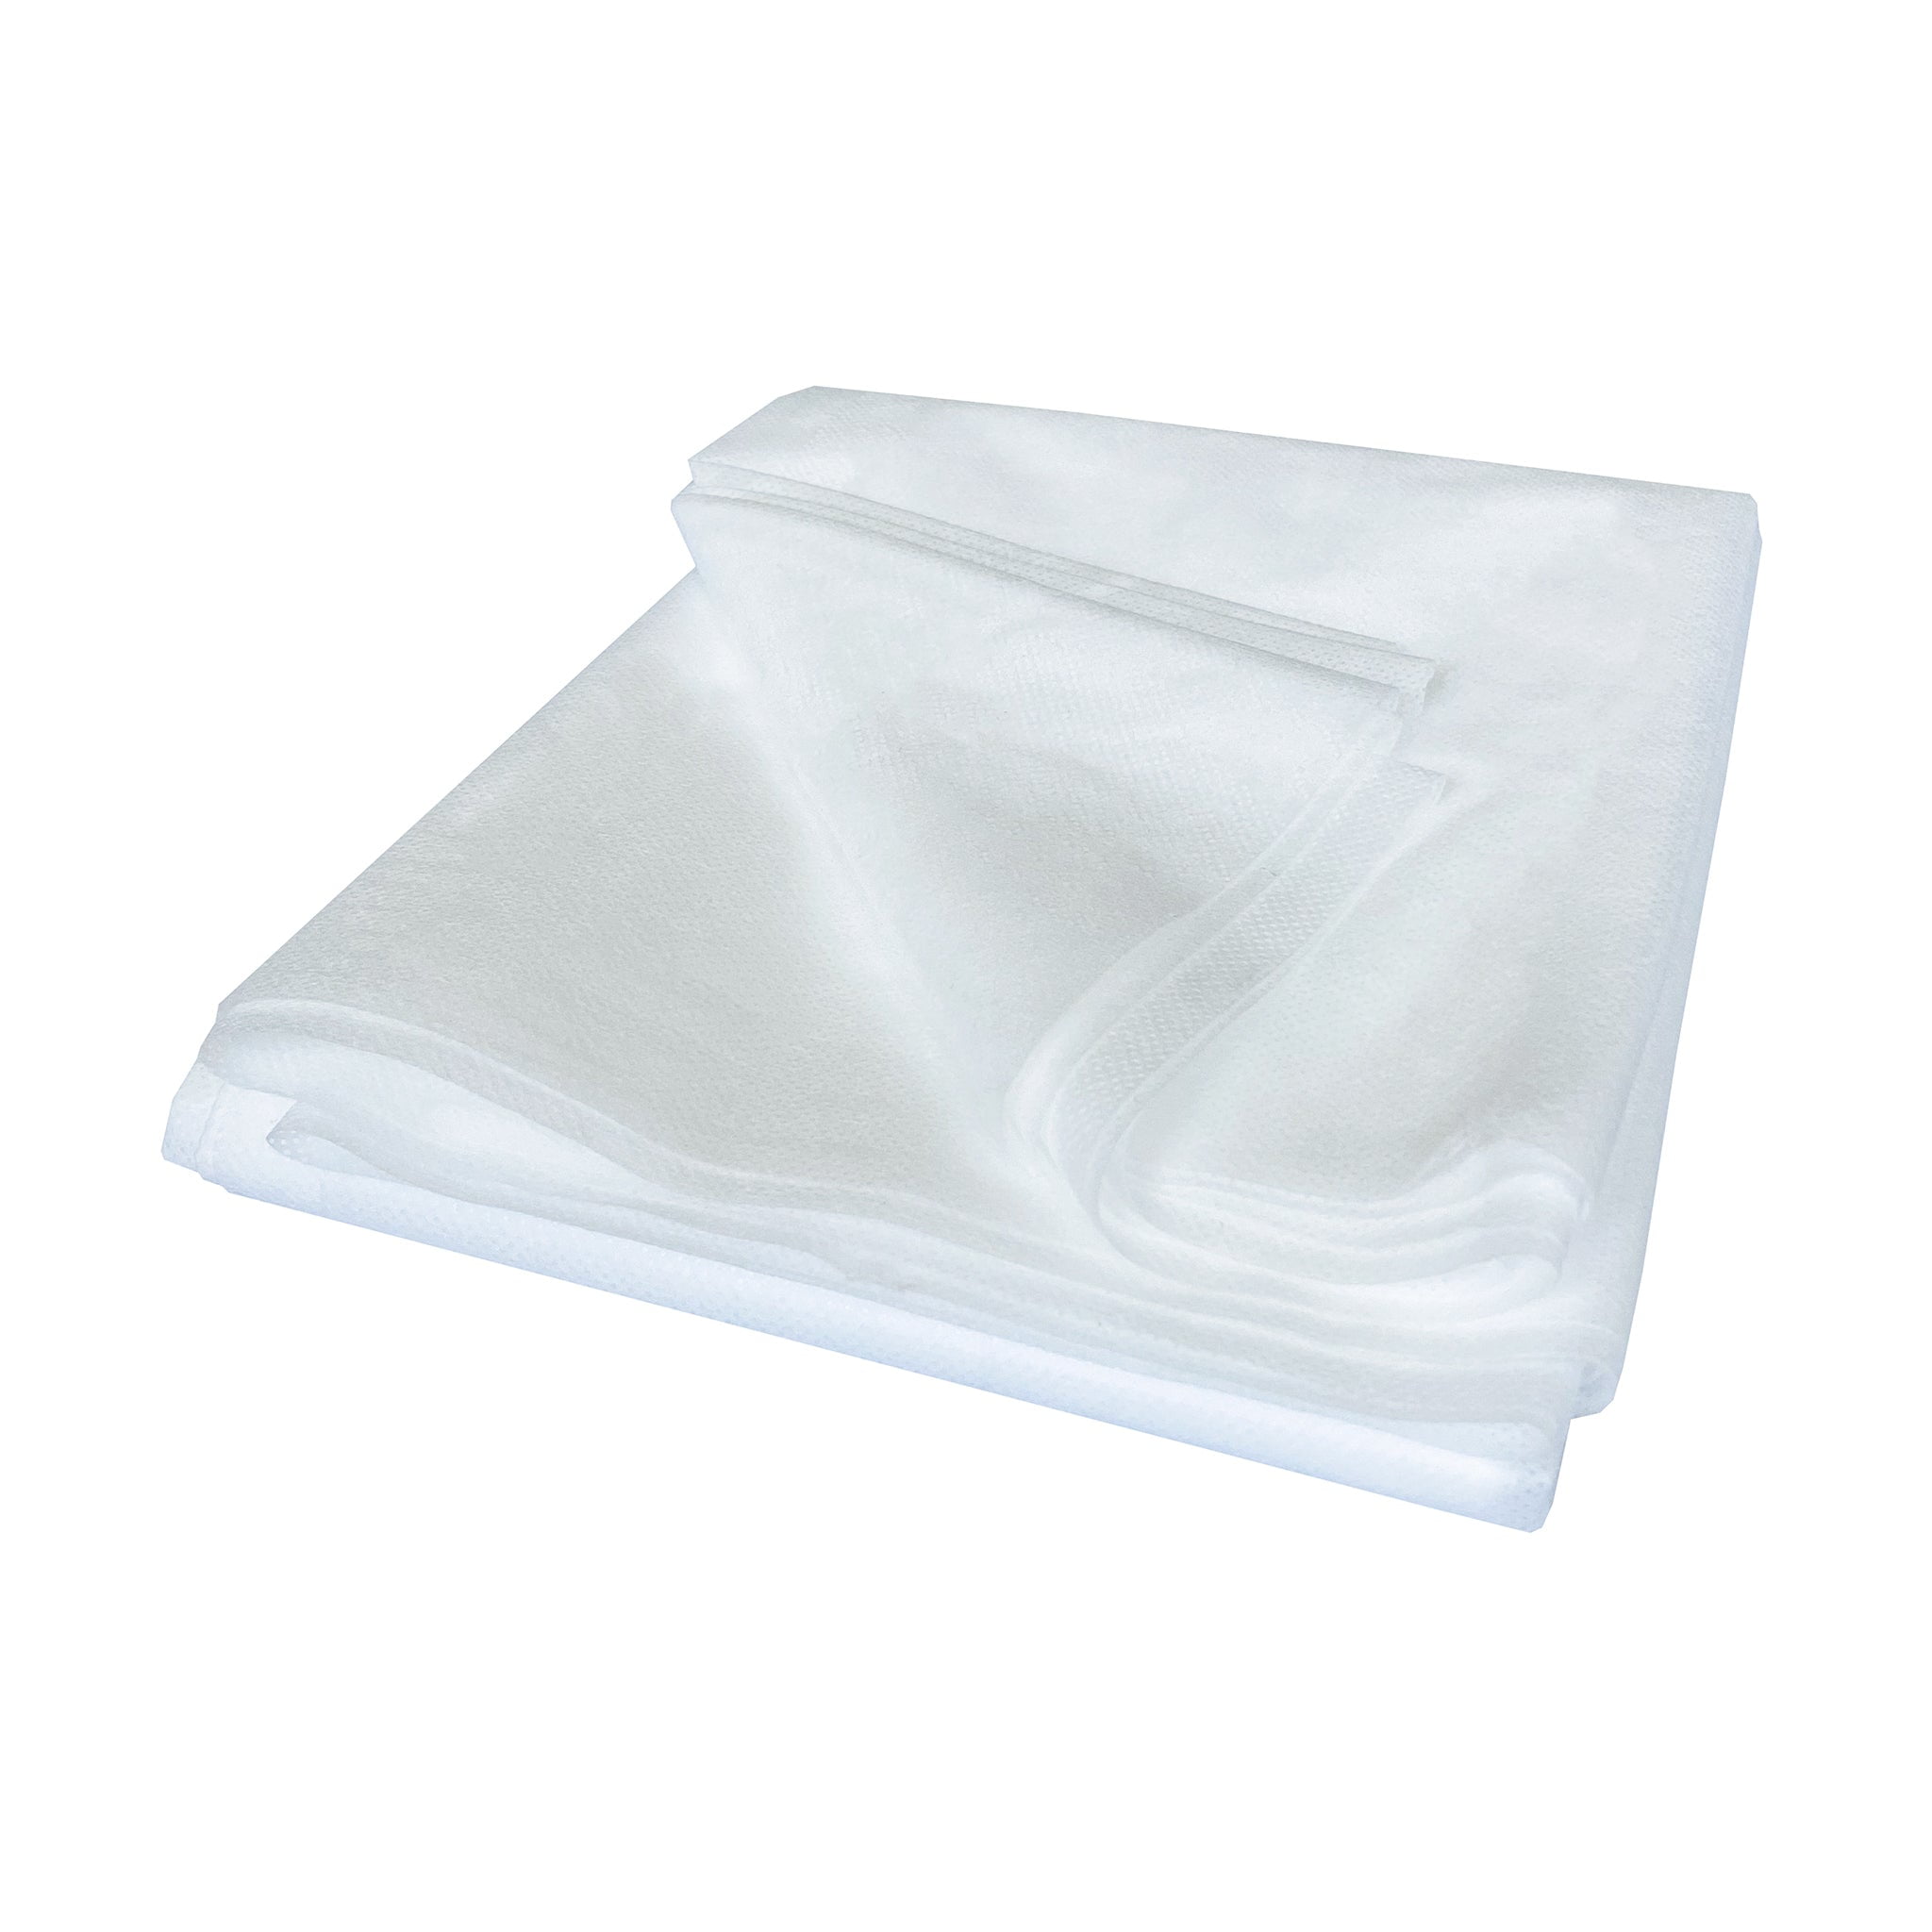 House2Home White Non-Woven Interfacing Fabric for Sewing, 40 inch x 3 Yds.  68 GSM (Heavy Weight)